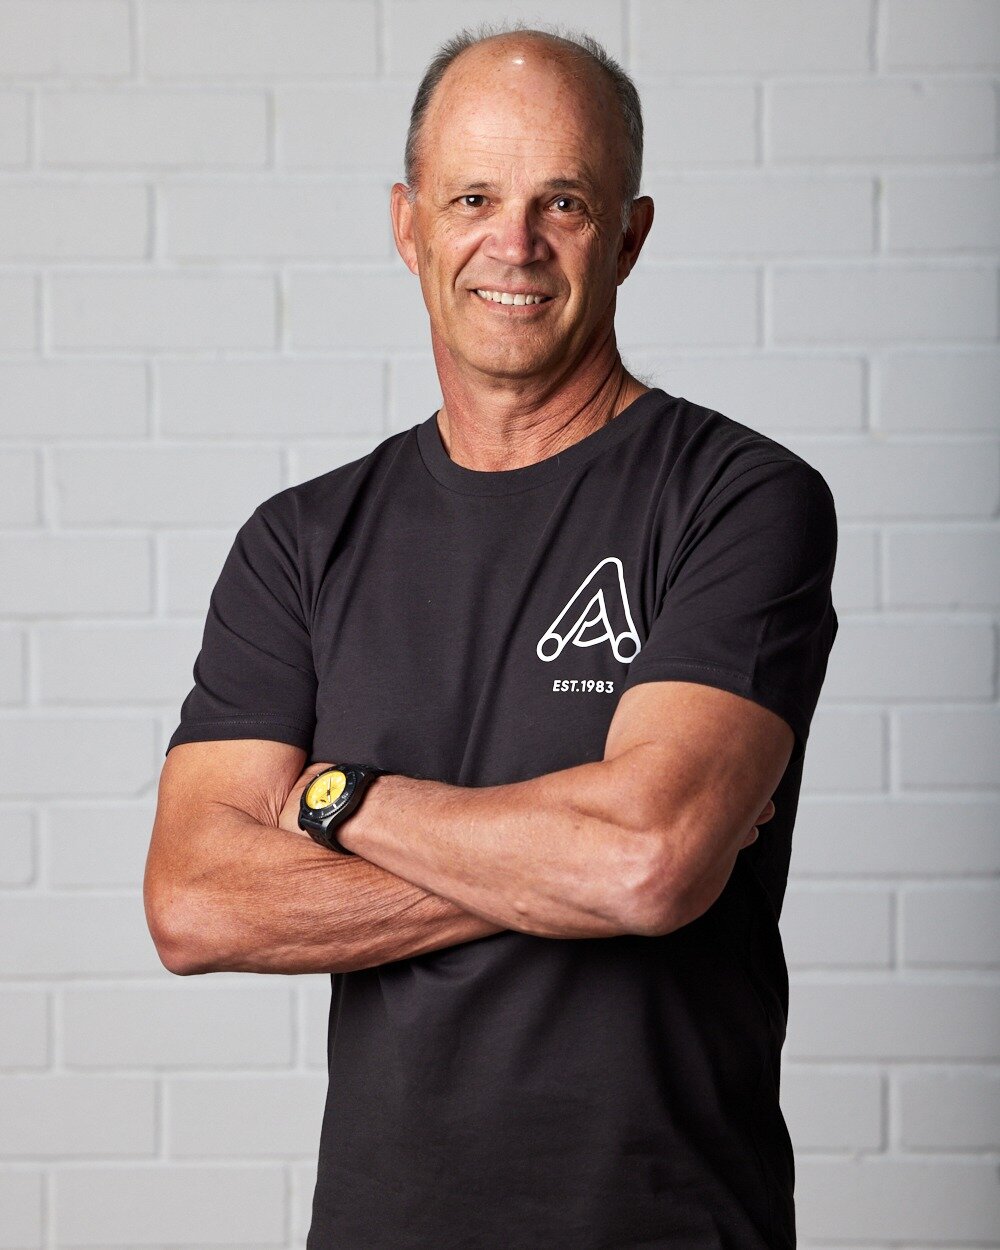 Mark 
Mark founded Action Plumbing in 1983 and is responsible for the reputation and long history of professionalism and quality plumbing services. While he has passed the reigns of the business to Simon, Mark never hesitates to provide his wisdom to